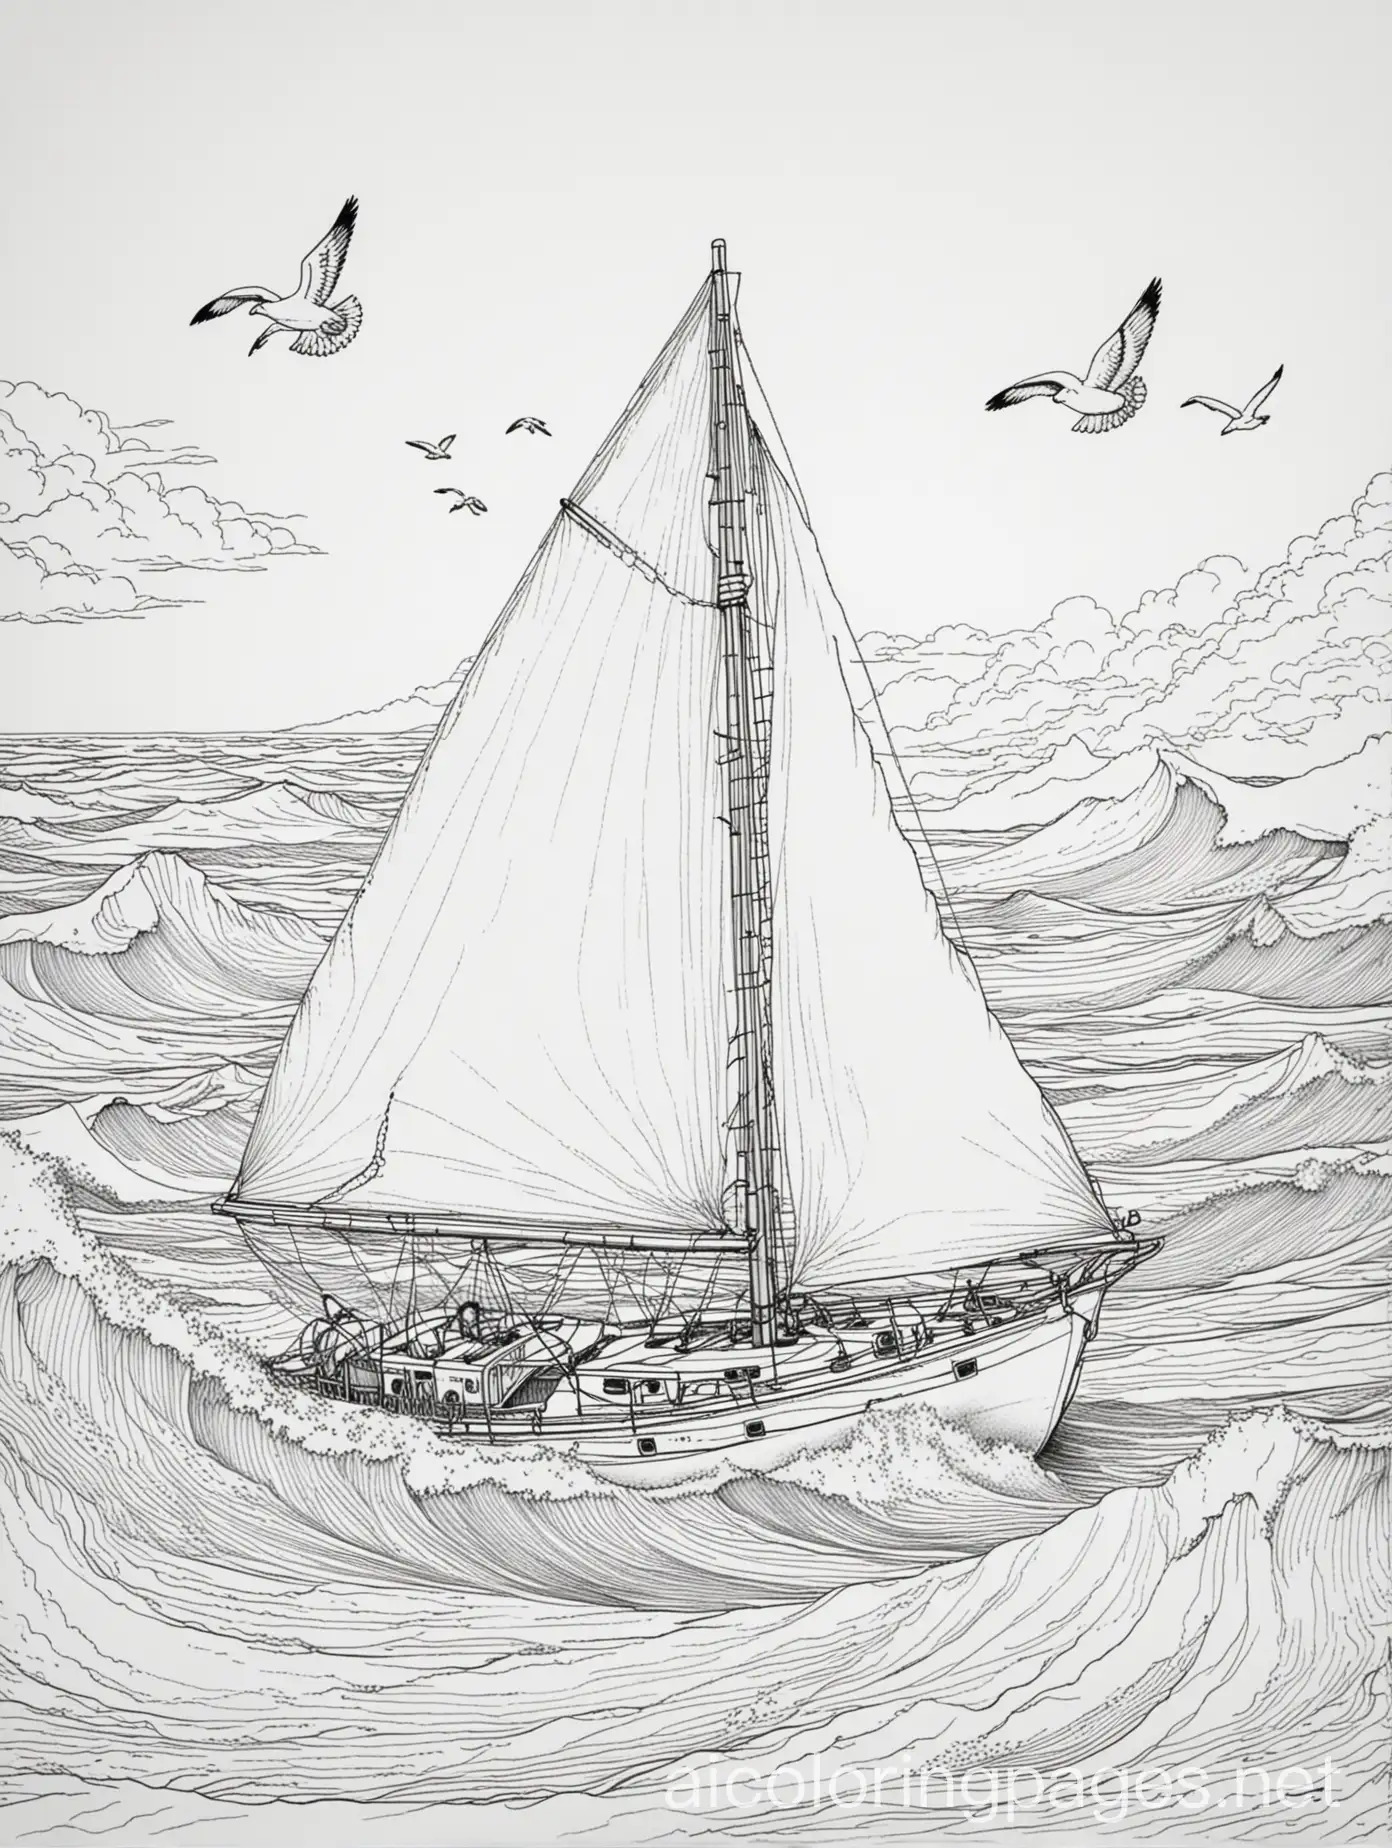 Sailing-Adventure-Coloring-Page-Sailboat-Waves-Seagulls-Black-and-White